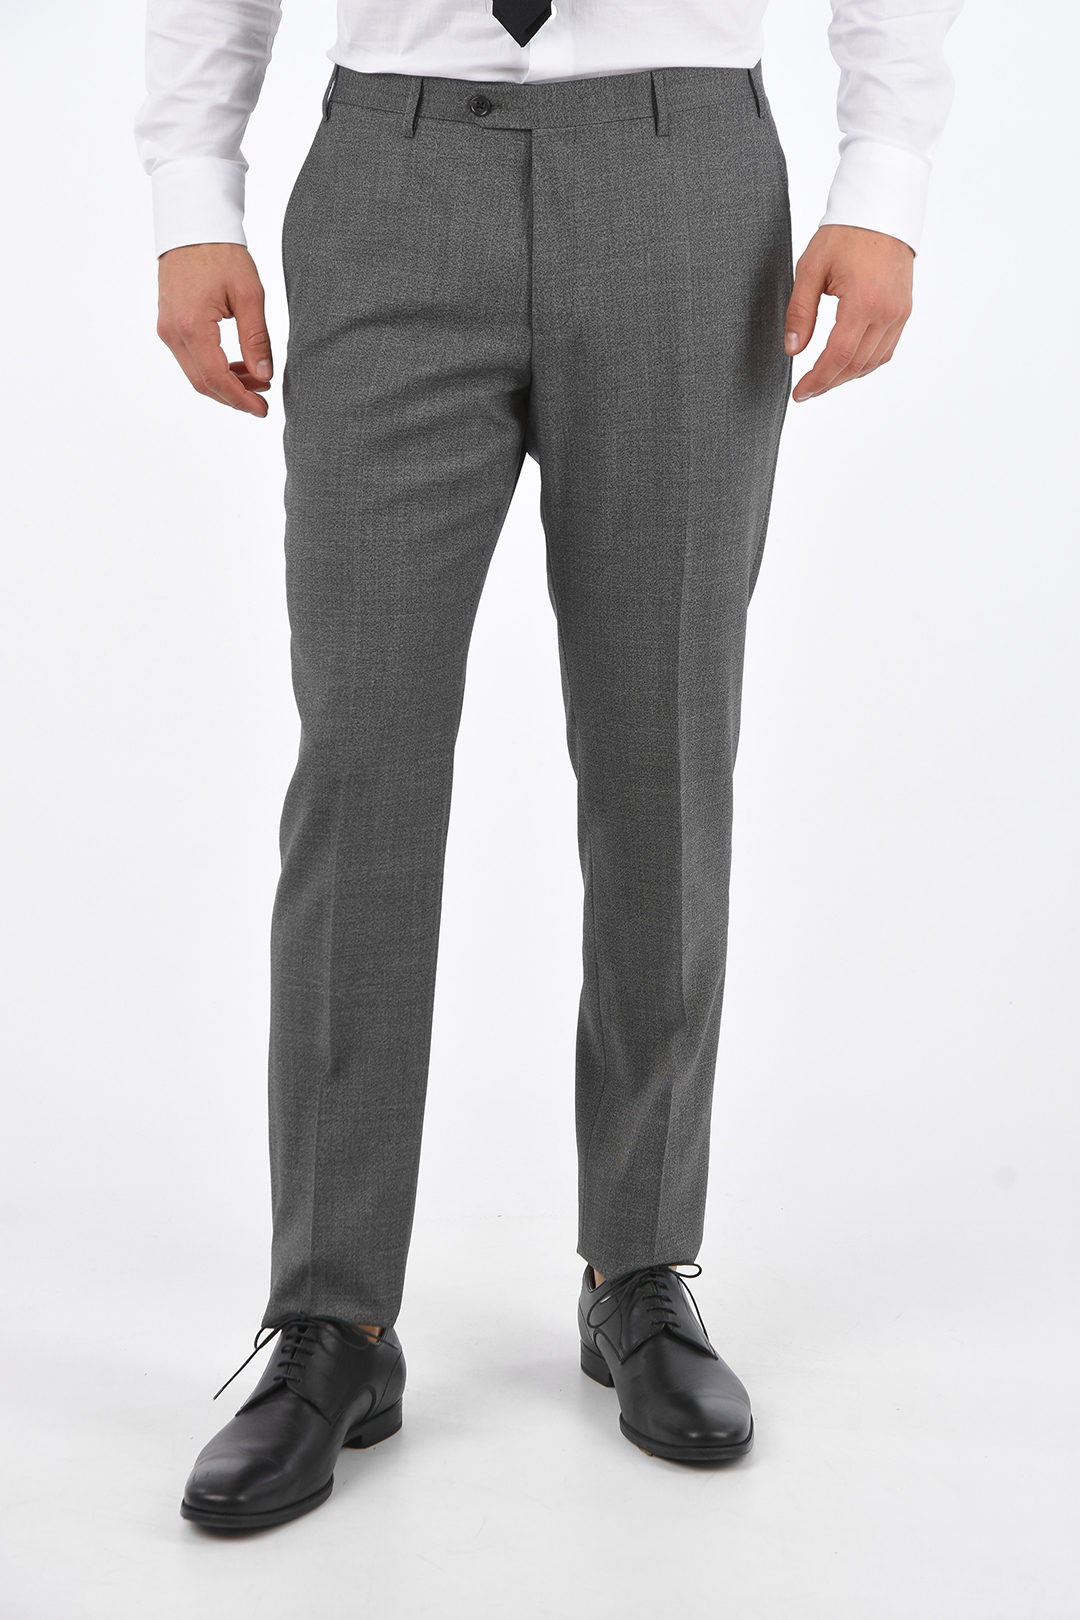 Corneliani CC COLLECTION Side Vents RIGHT Hopsack Suit men - Glamood Outlet